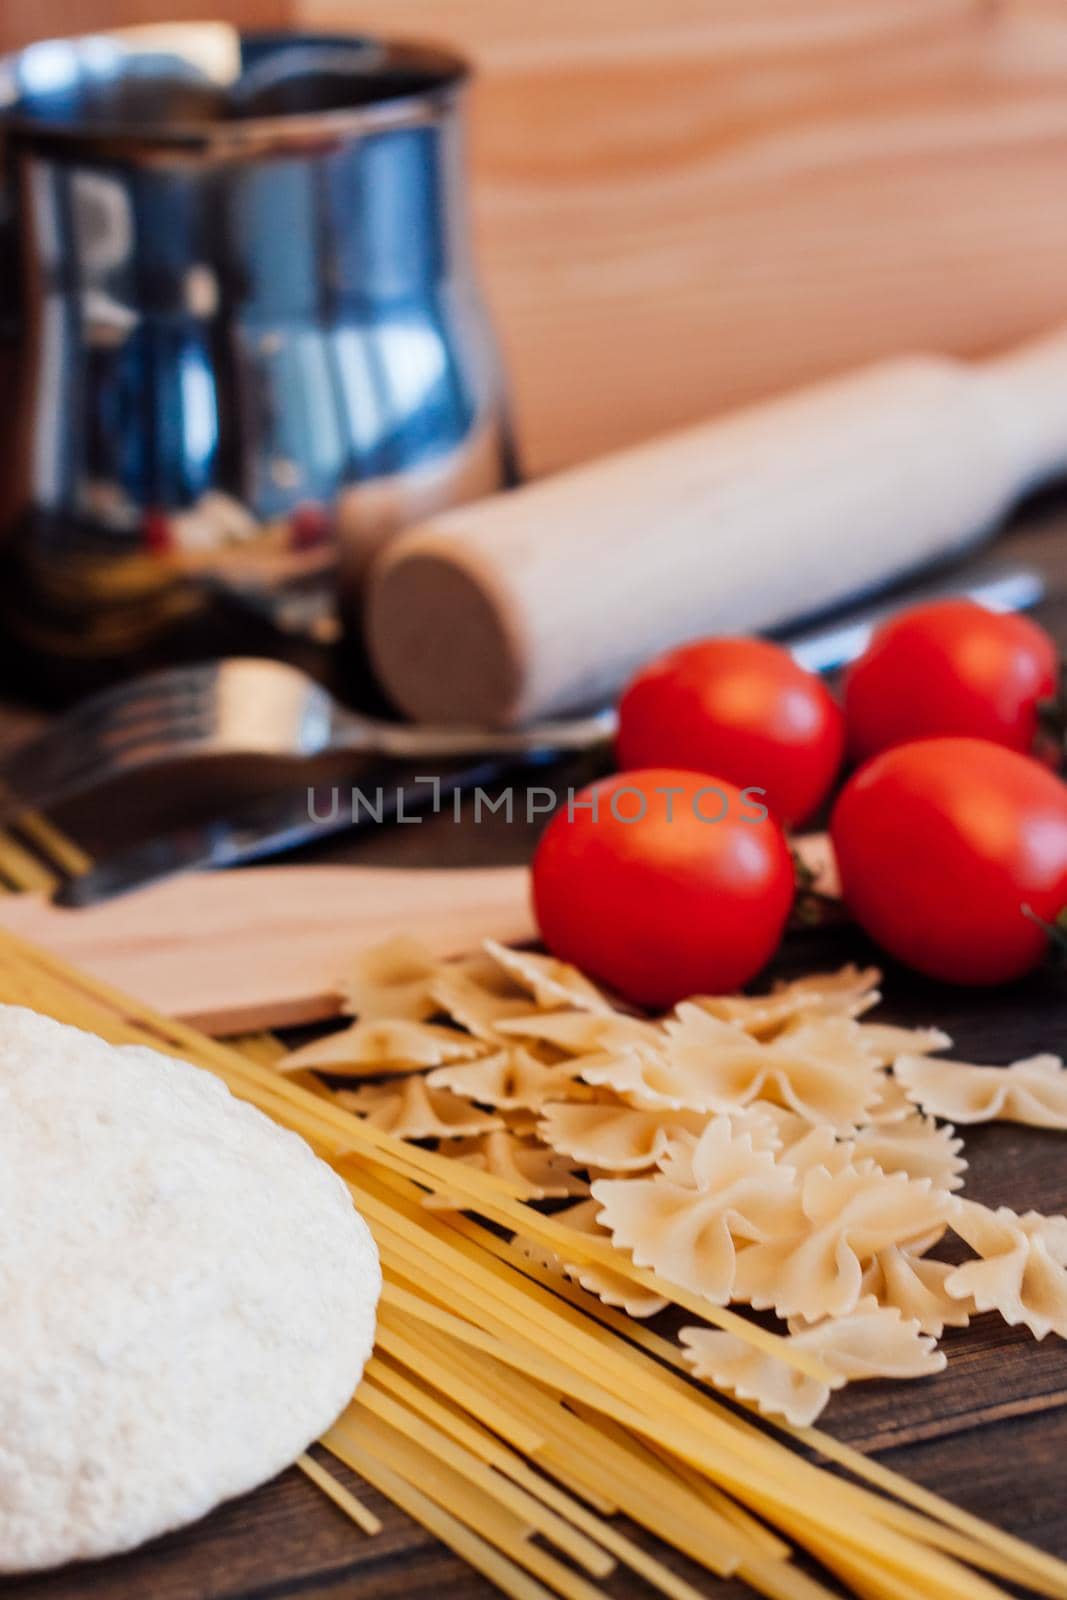 cooking italian pasta by hand kitchen cherry tomatoes ingredients. High quality photo